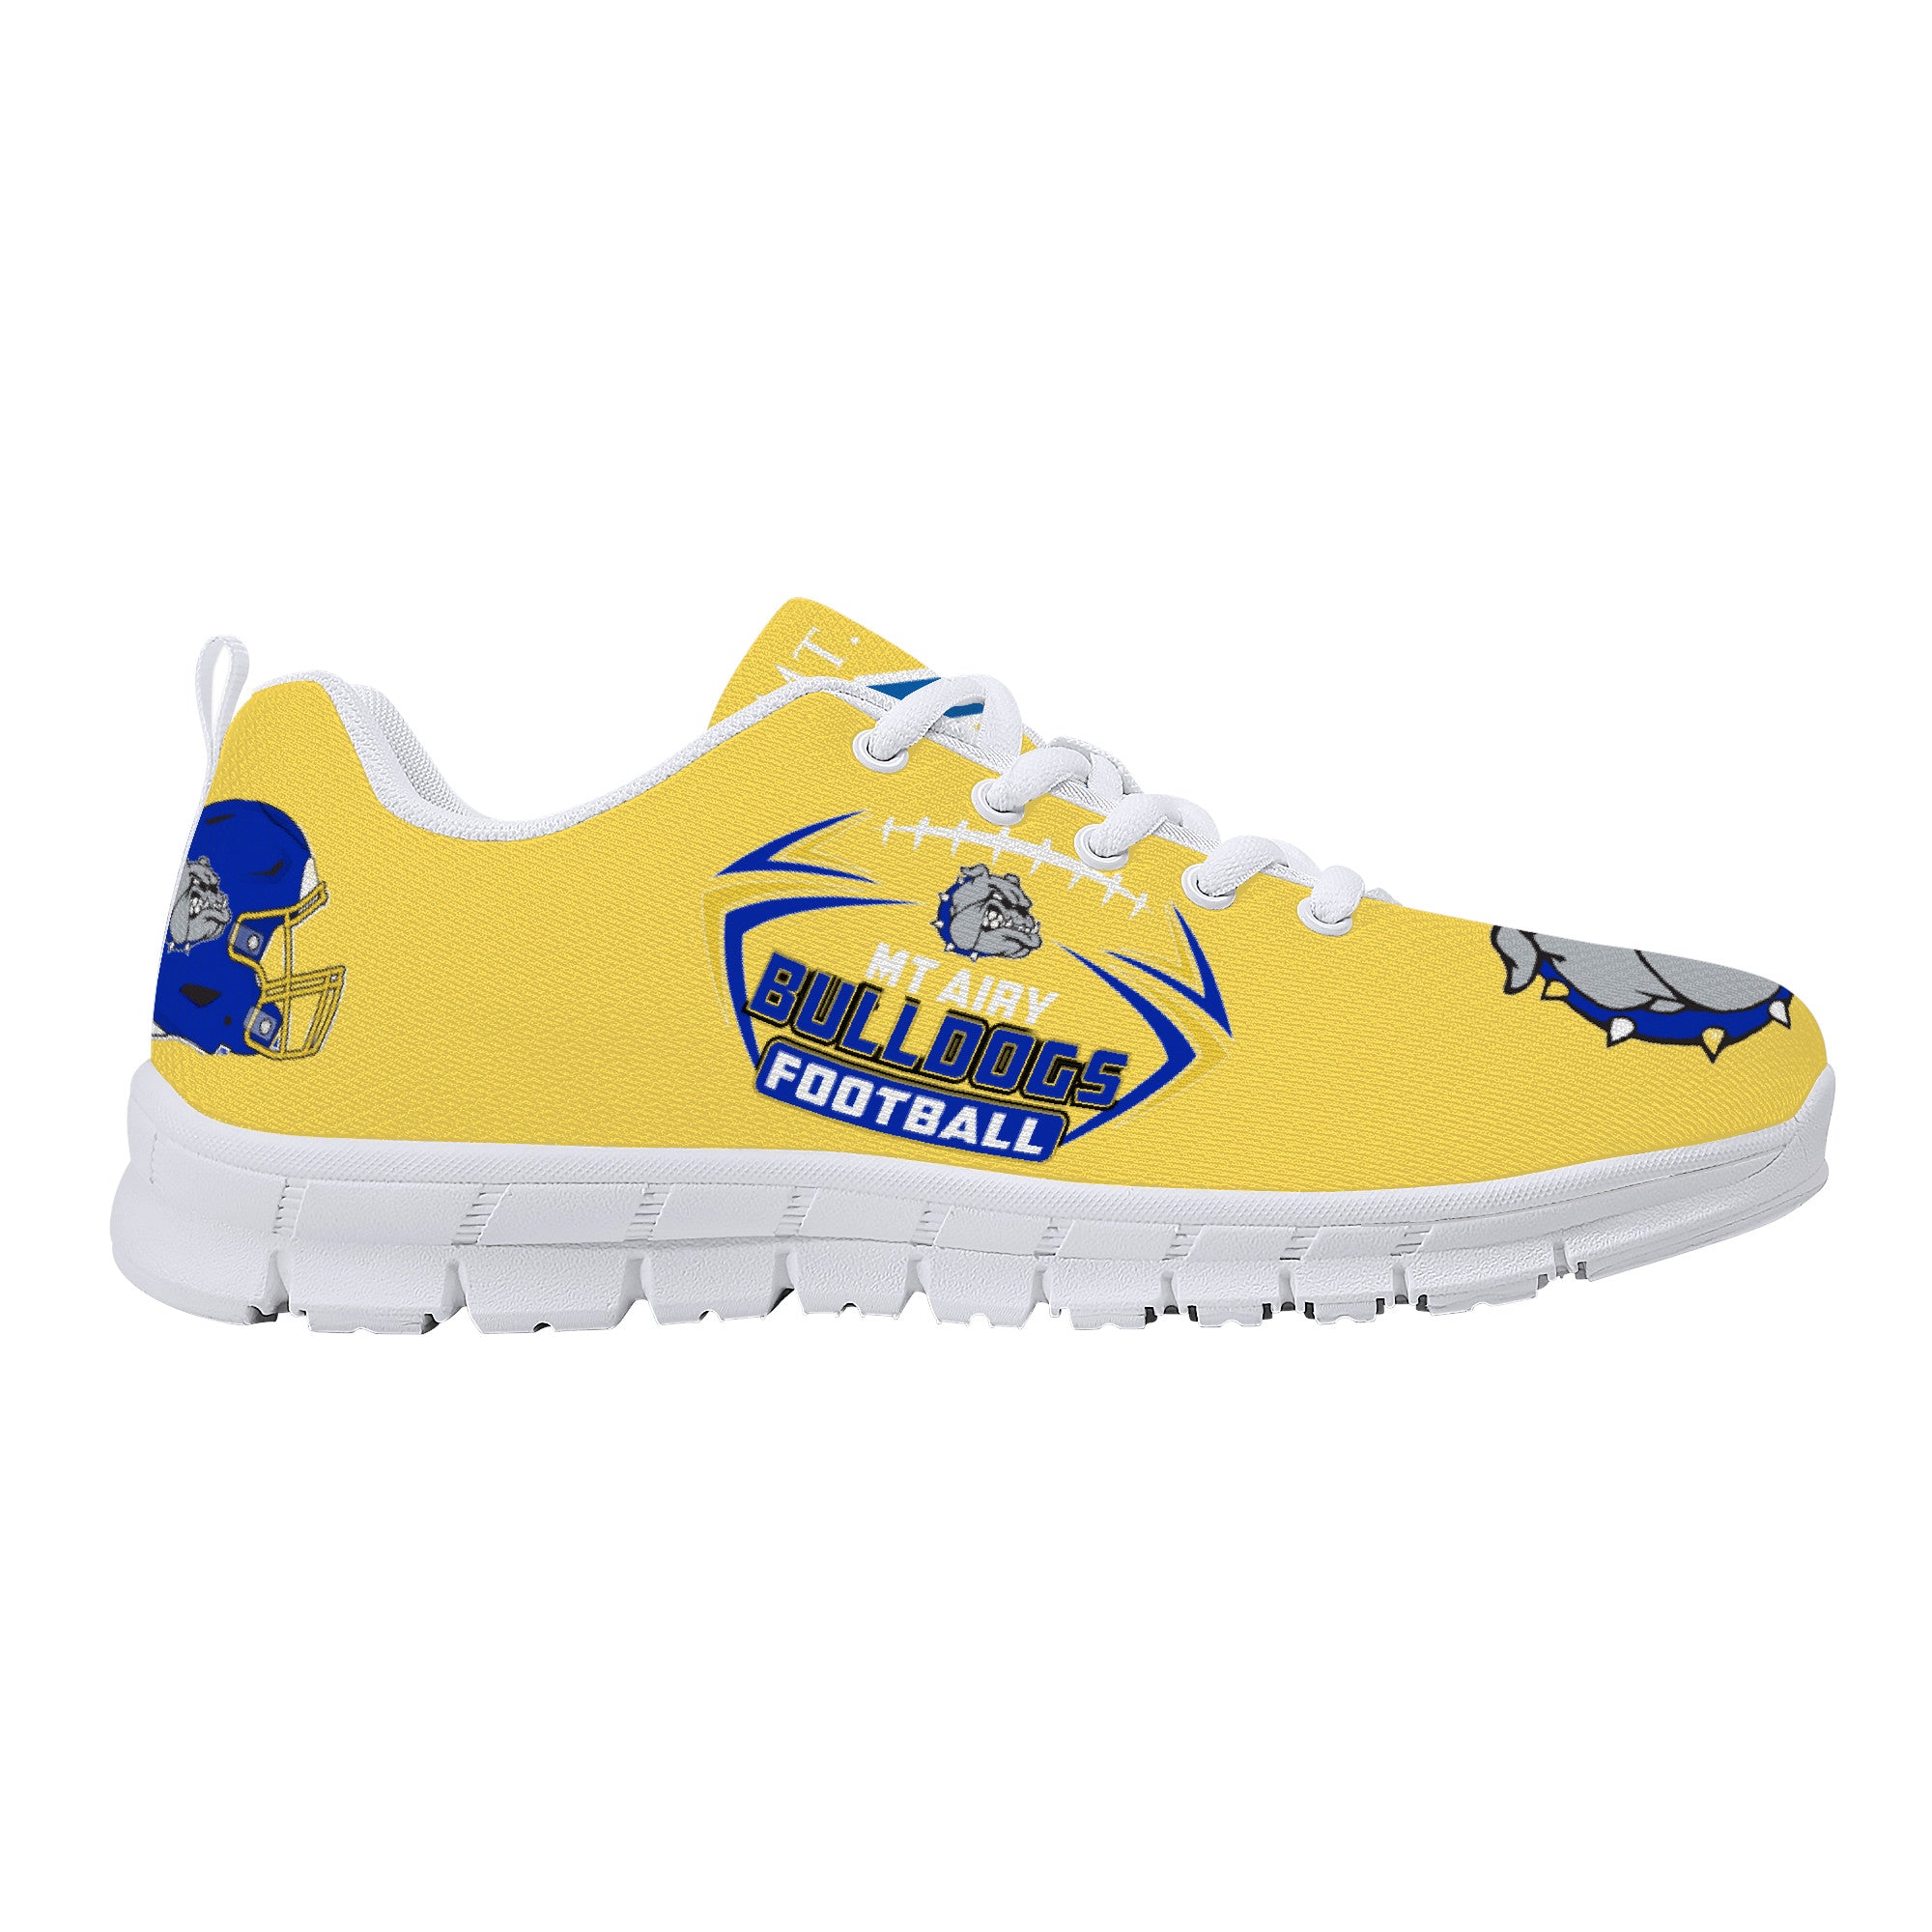 Bulldogs Football shoes by Philip S. | Low Tops Customized | Shoe Zero